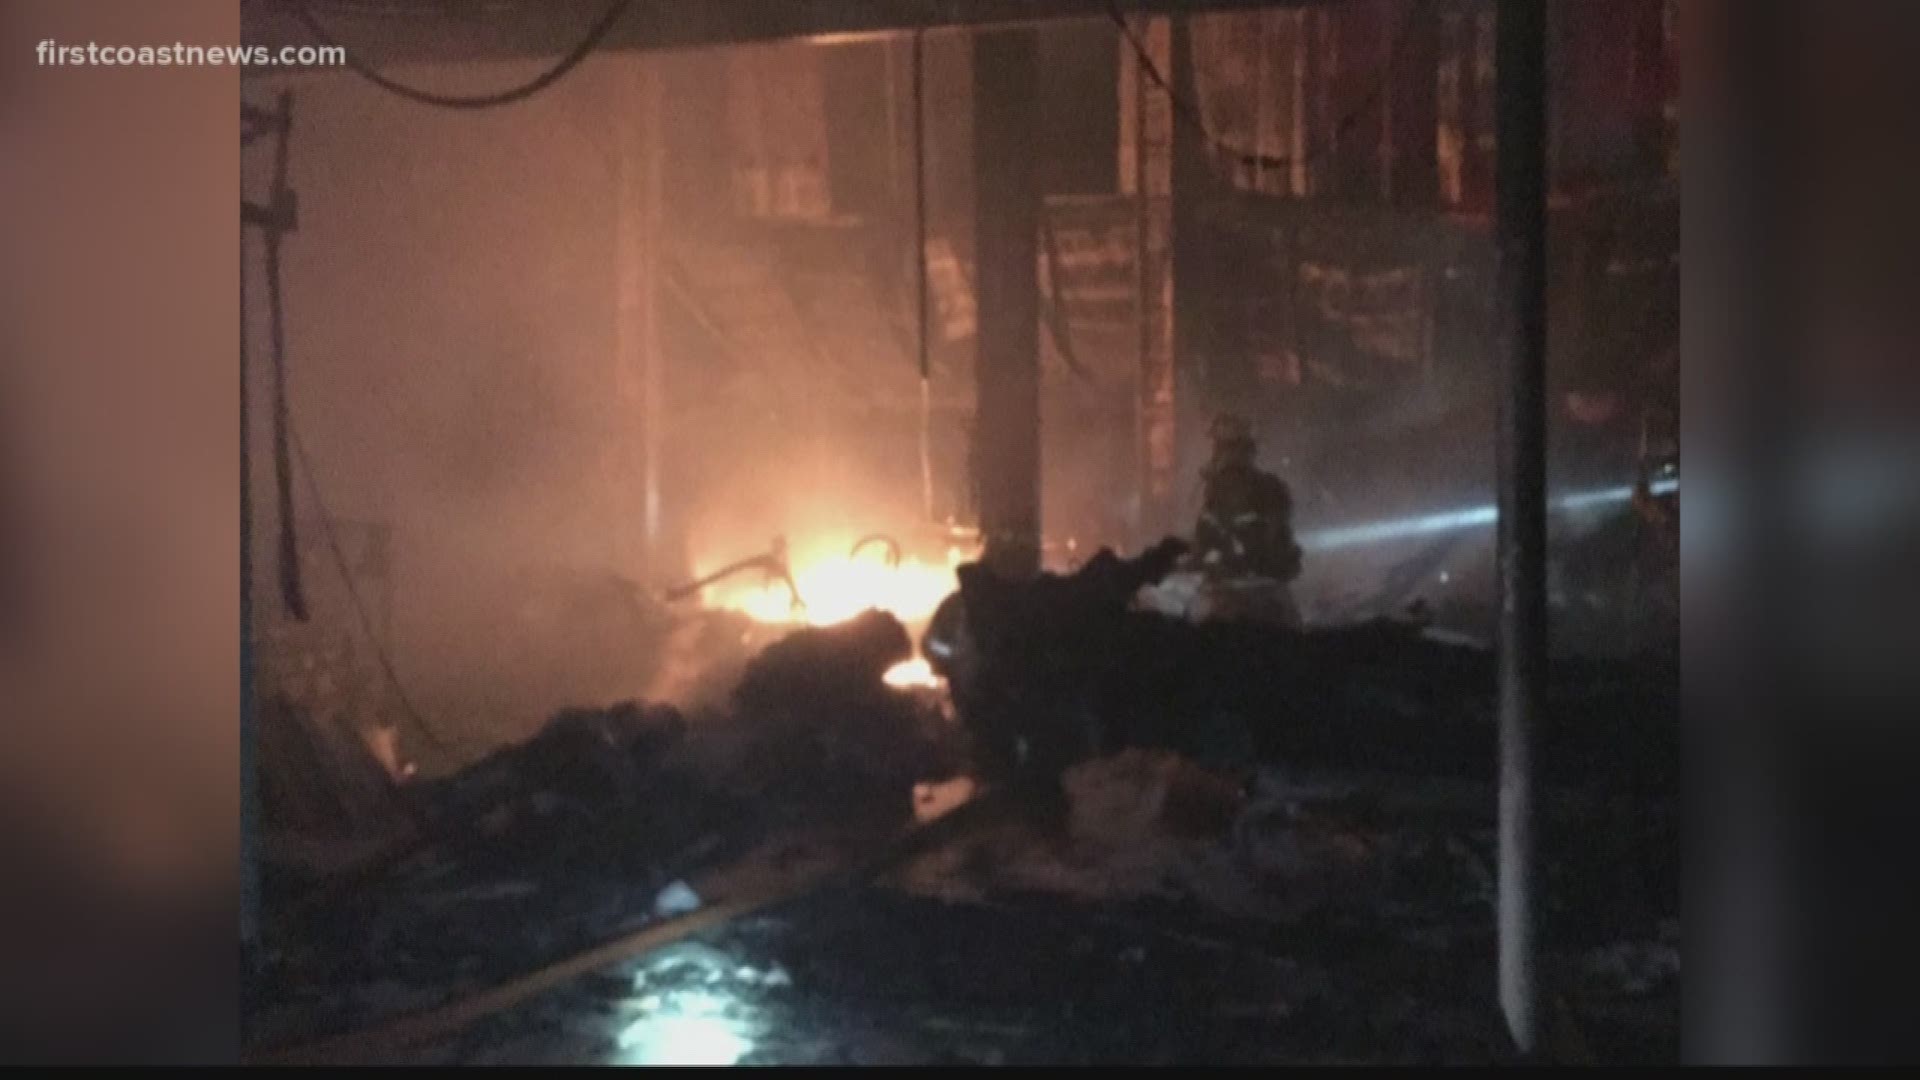 The Fernandina Beach Fire Department and Nassau County Fire-Rescue responded to a call about a fire that broke out in a building at Tiger Point Marina at 11:40 p.m. Monday.